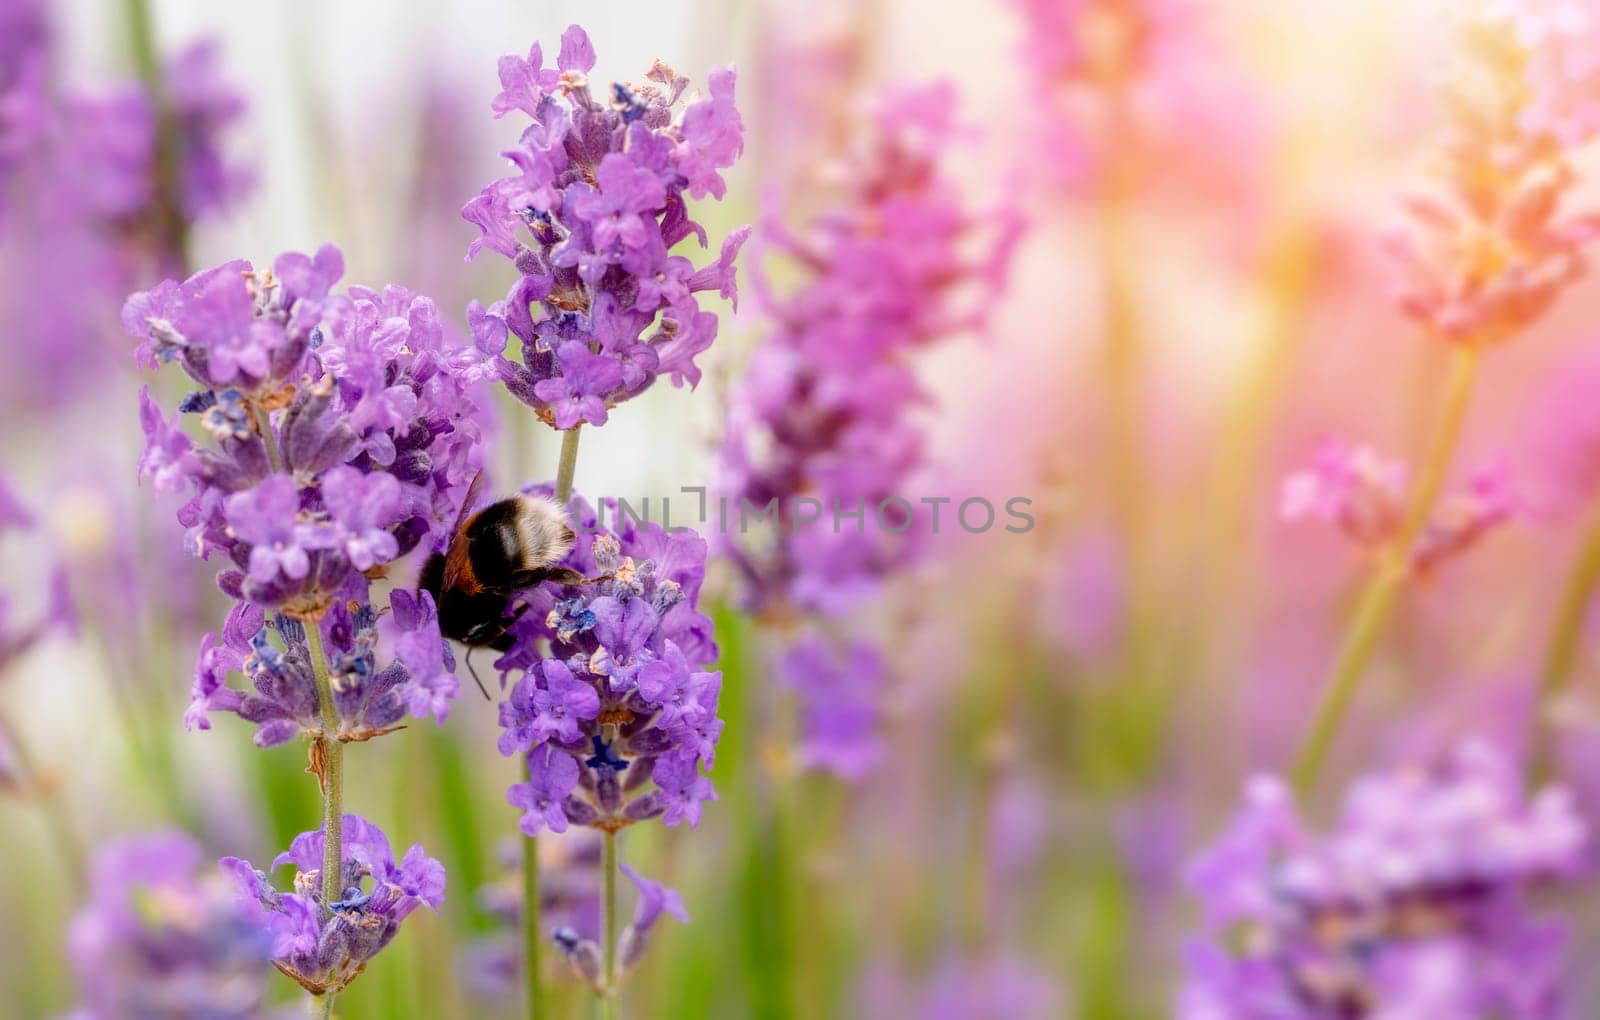 bumblebee on lavender flower on sunny summer day Summer flowers. Summertime High quality photo by Iryna_Melnyk